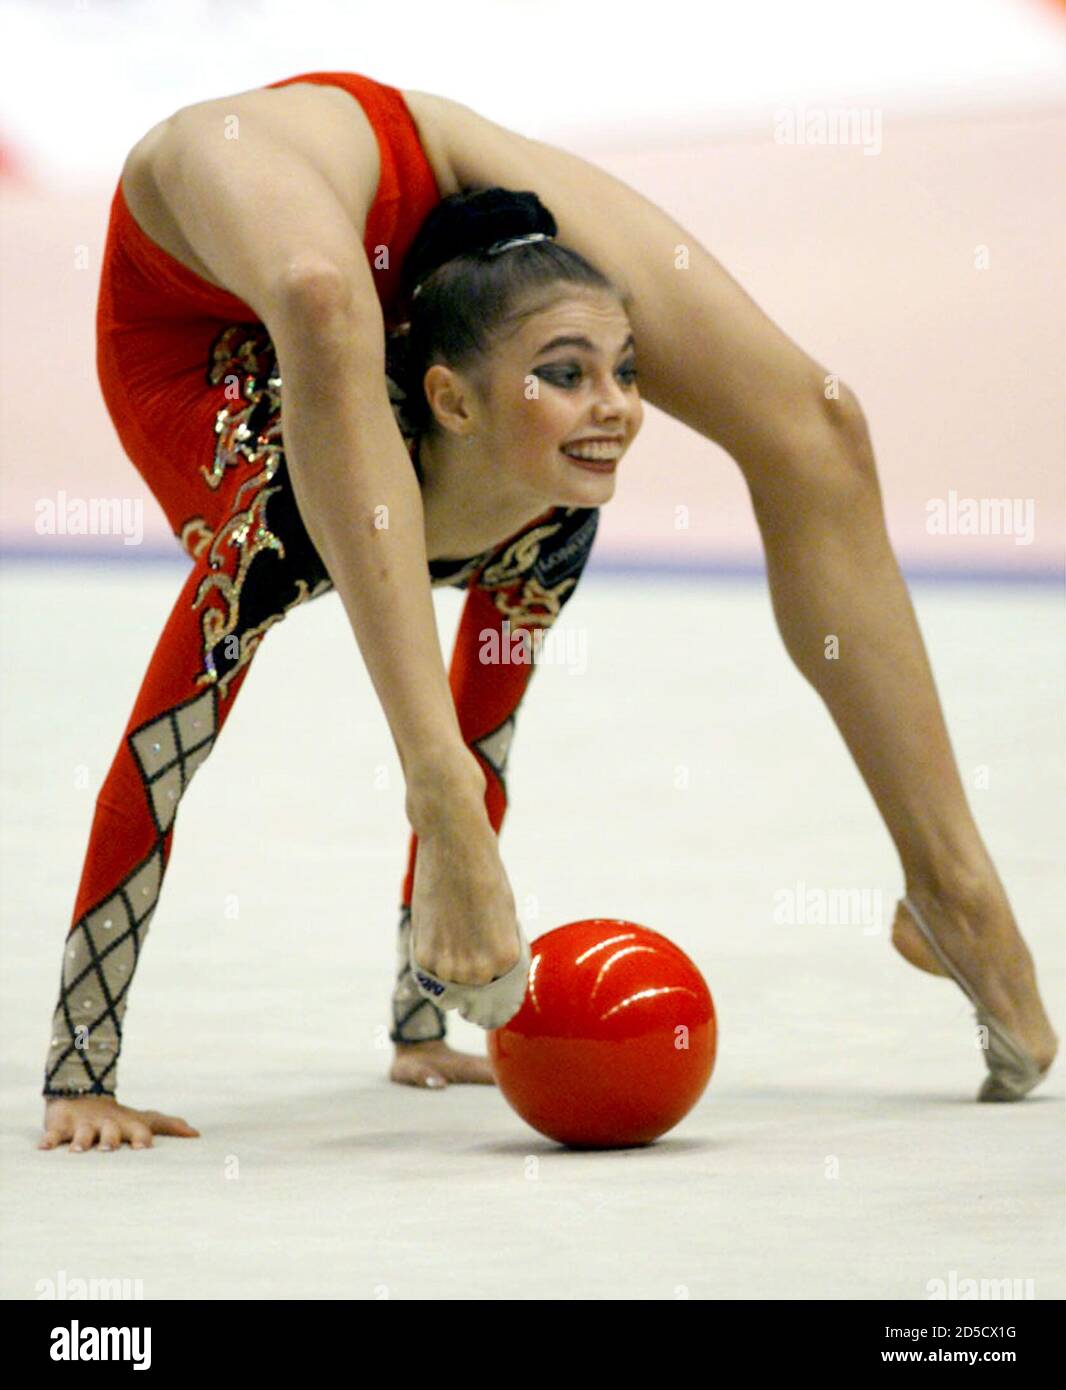 World champion Alina Kabaeva of Russia performs the ball event in the World  Rhythmic Gymnastics Club Championships in Tokyo October 10. Kabaeva scored  perfect 10 point in all four events to win